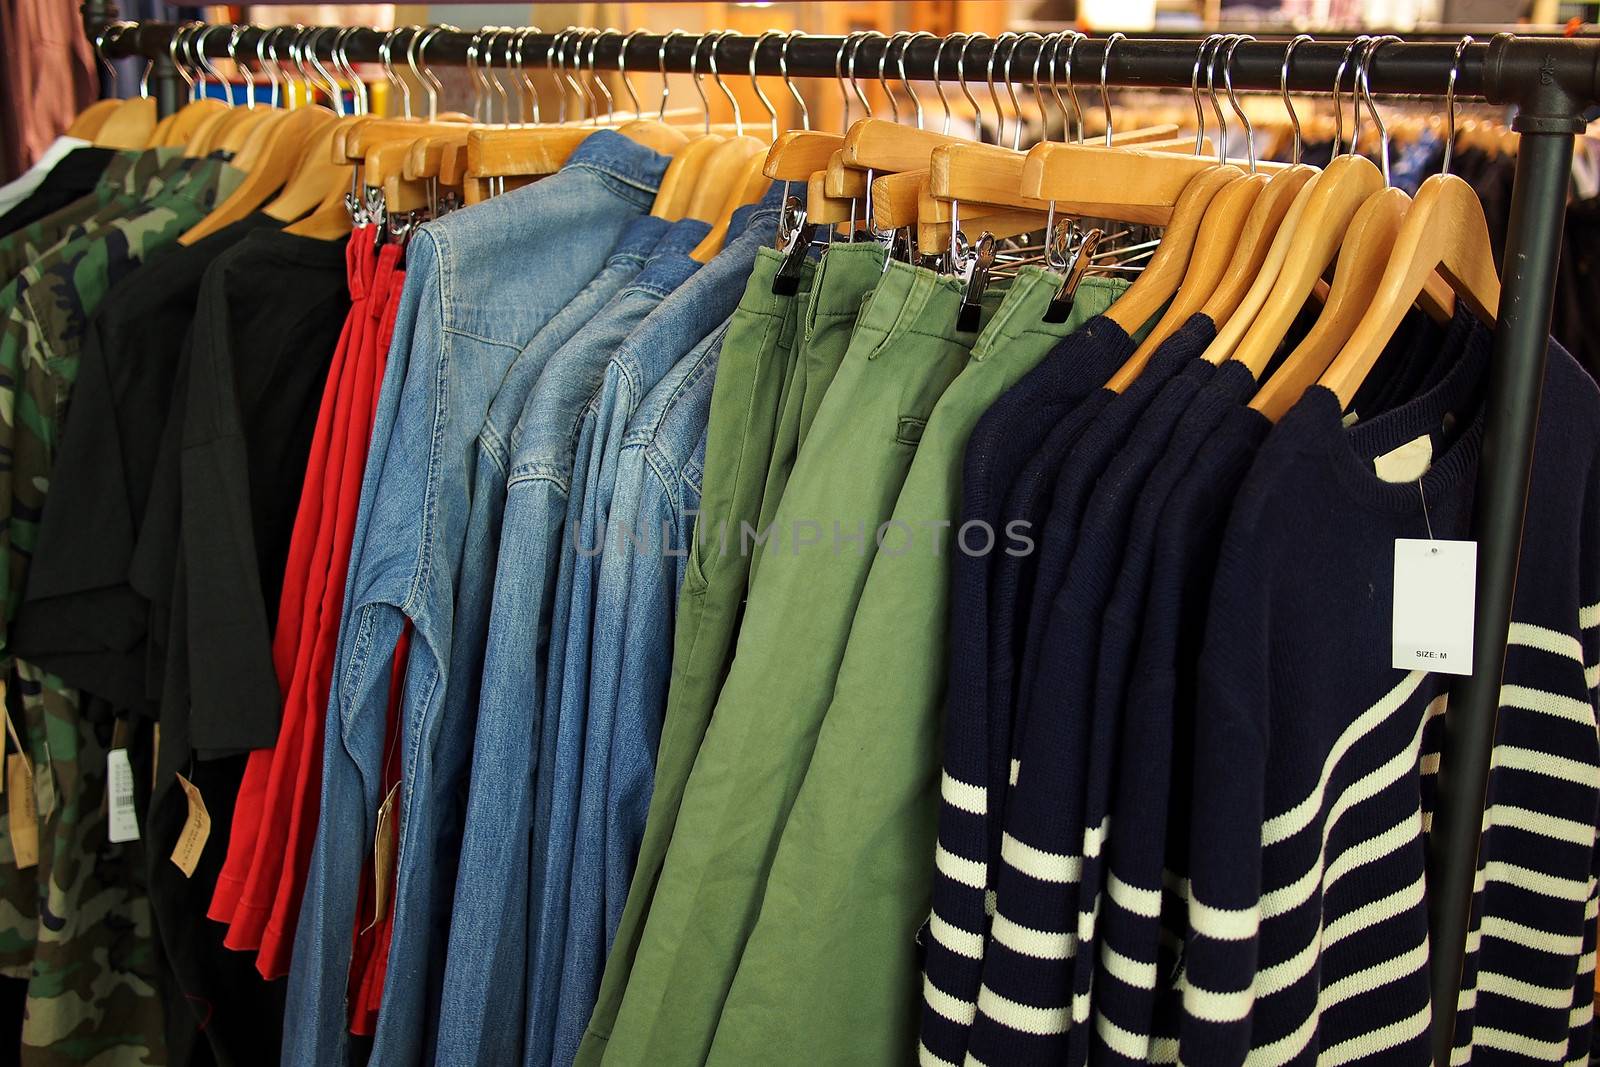 Colorful fashion apparels hanging on wooden hangers